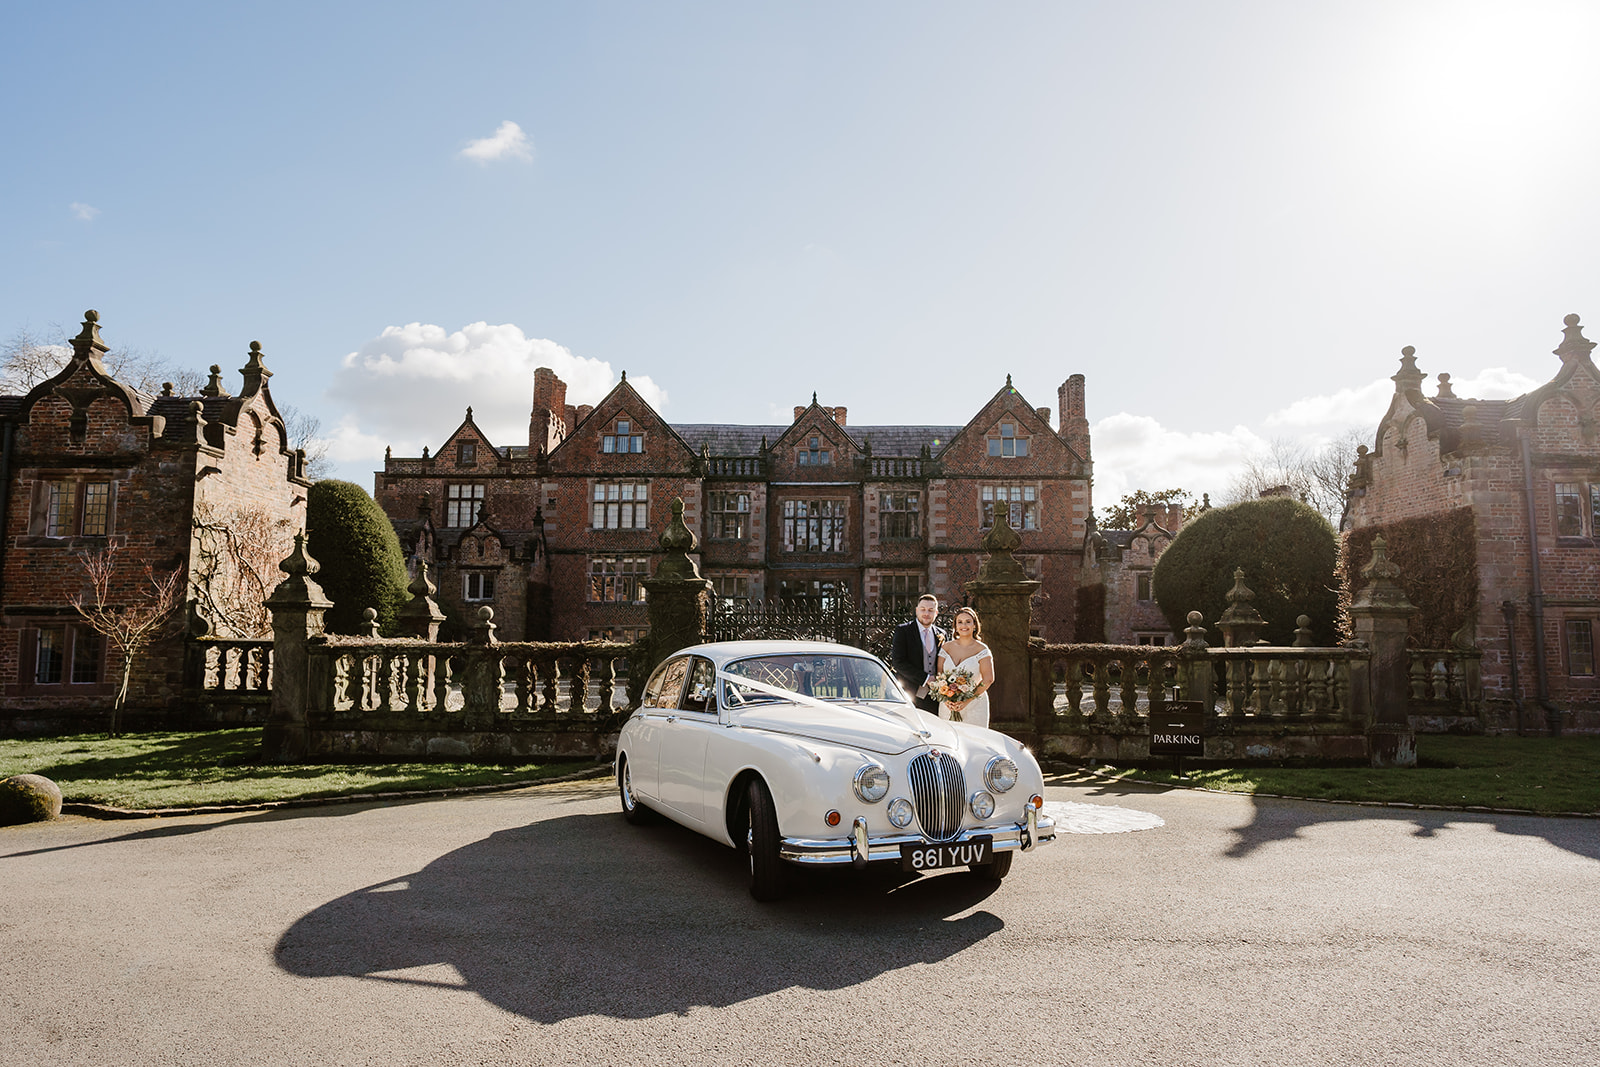 Bride and groom pose by car in front of Dorfold Hall